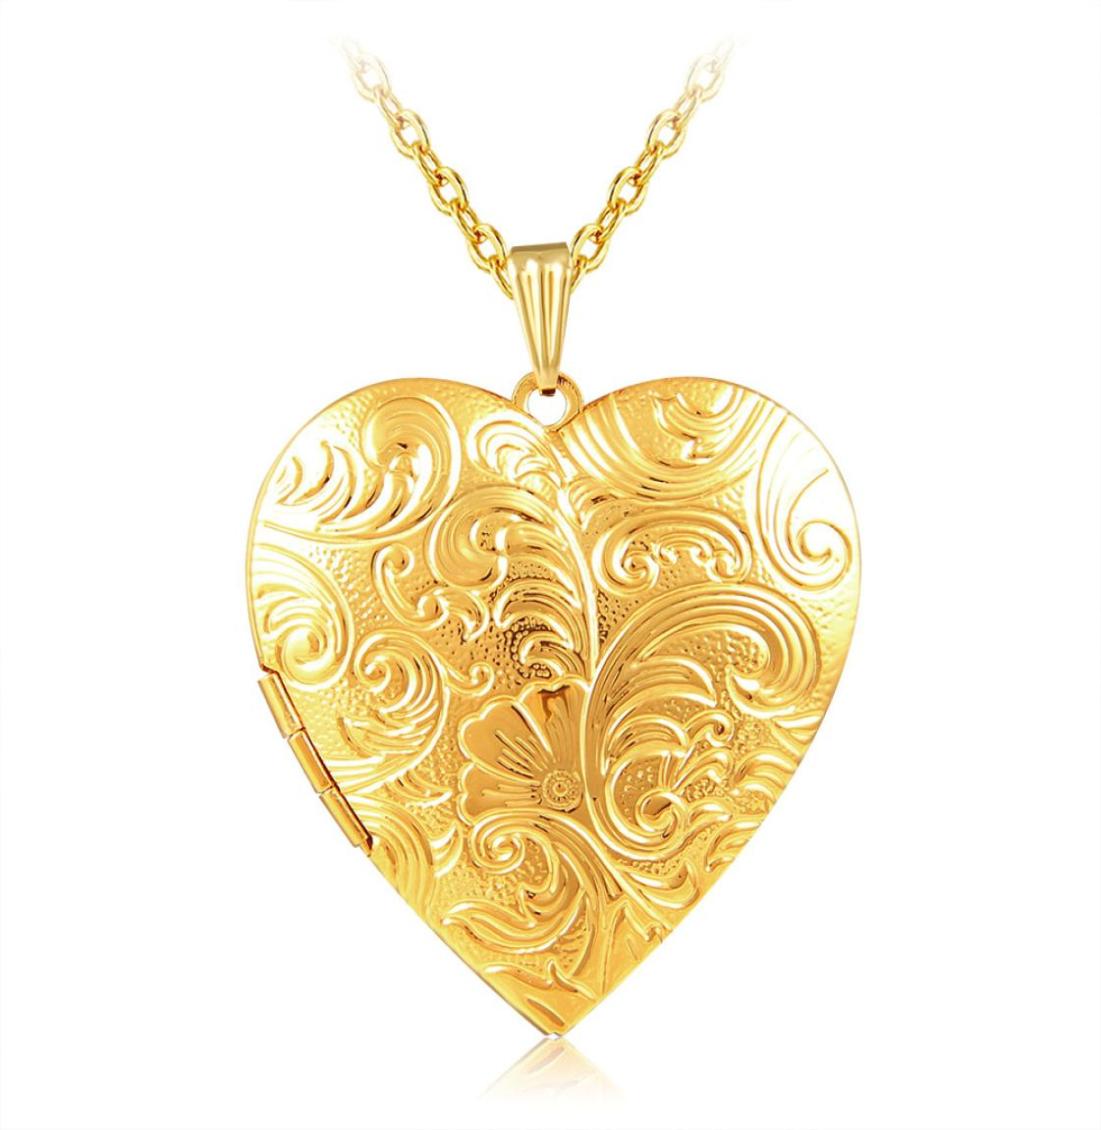 

Whole Jewelry Big Heart Lockets Necklace Charm Necklace 18k gold plated Po Locket Frame Pendant Necklace For women Girls lo6733444